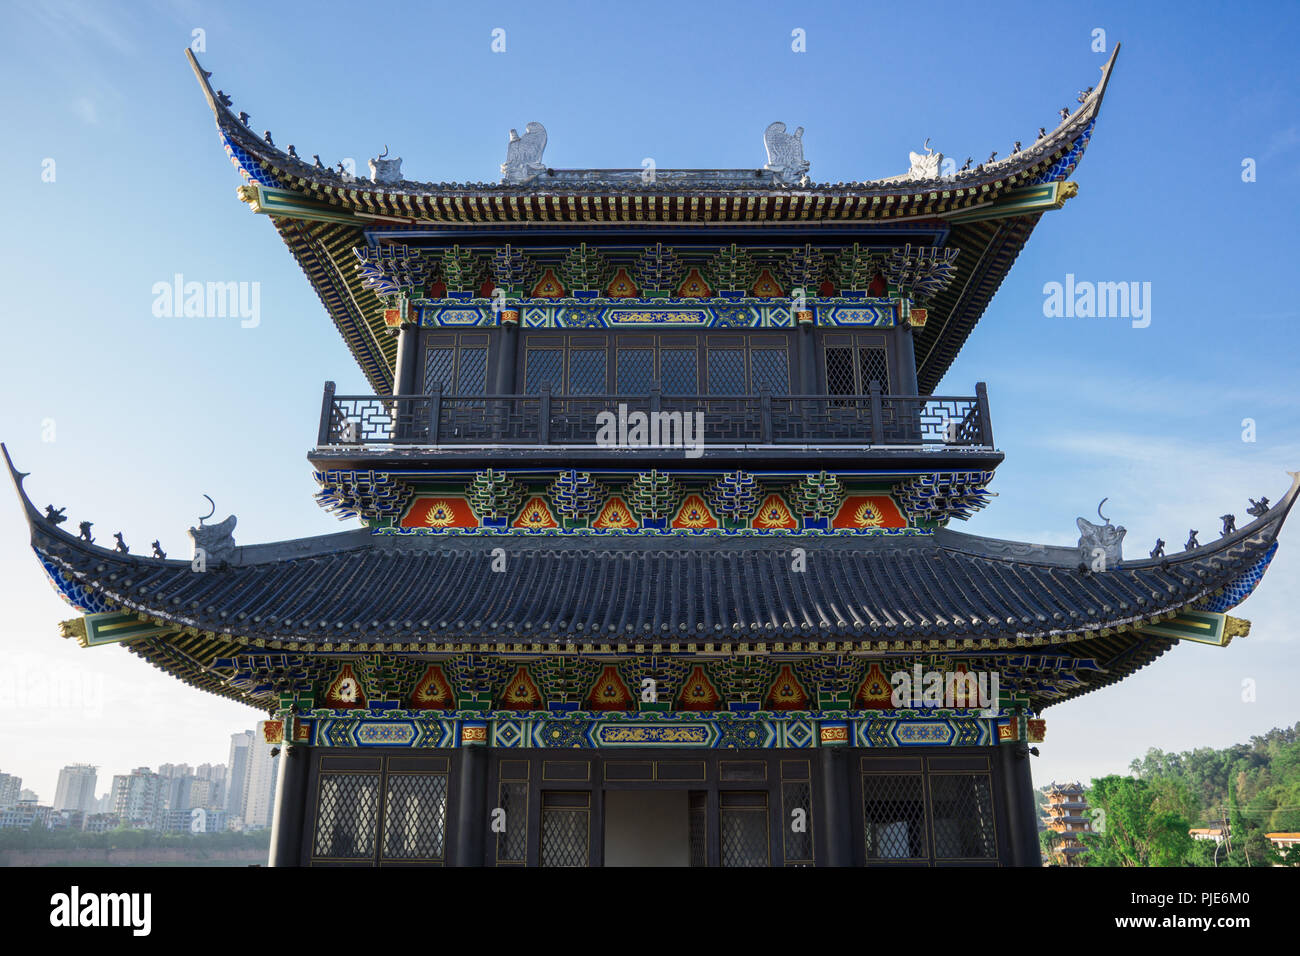 Cheng Du City is an ever-present in the city's storied heritage. Prosperous metropolis combination of grandeur and historic architecture. Stock Photo